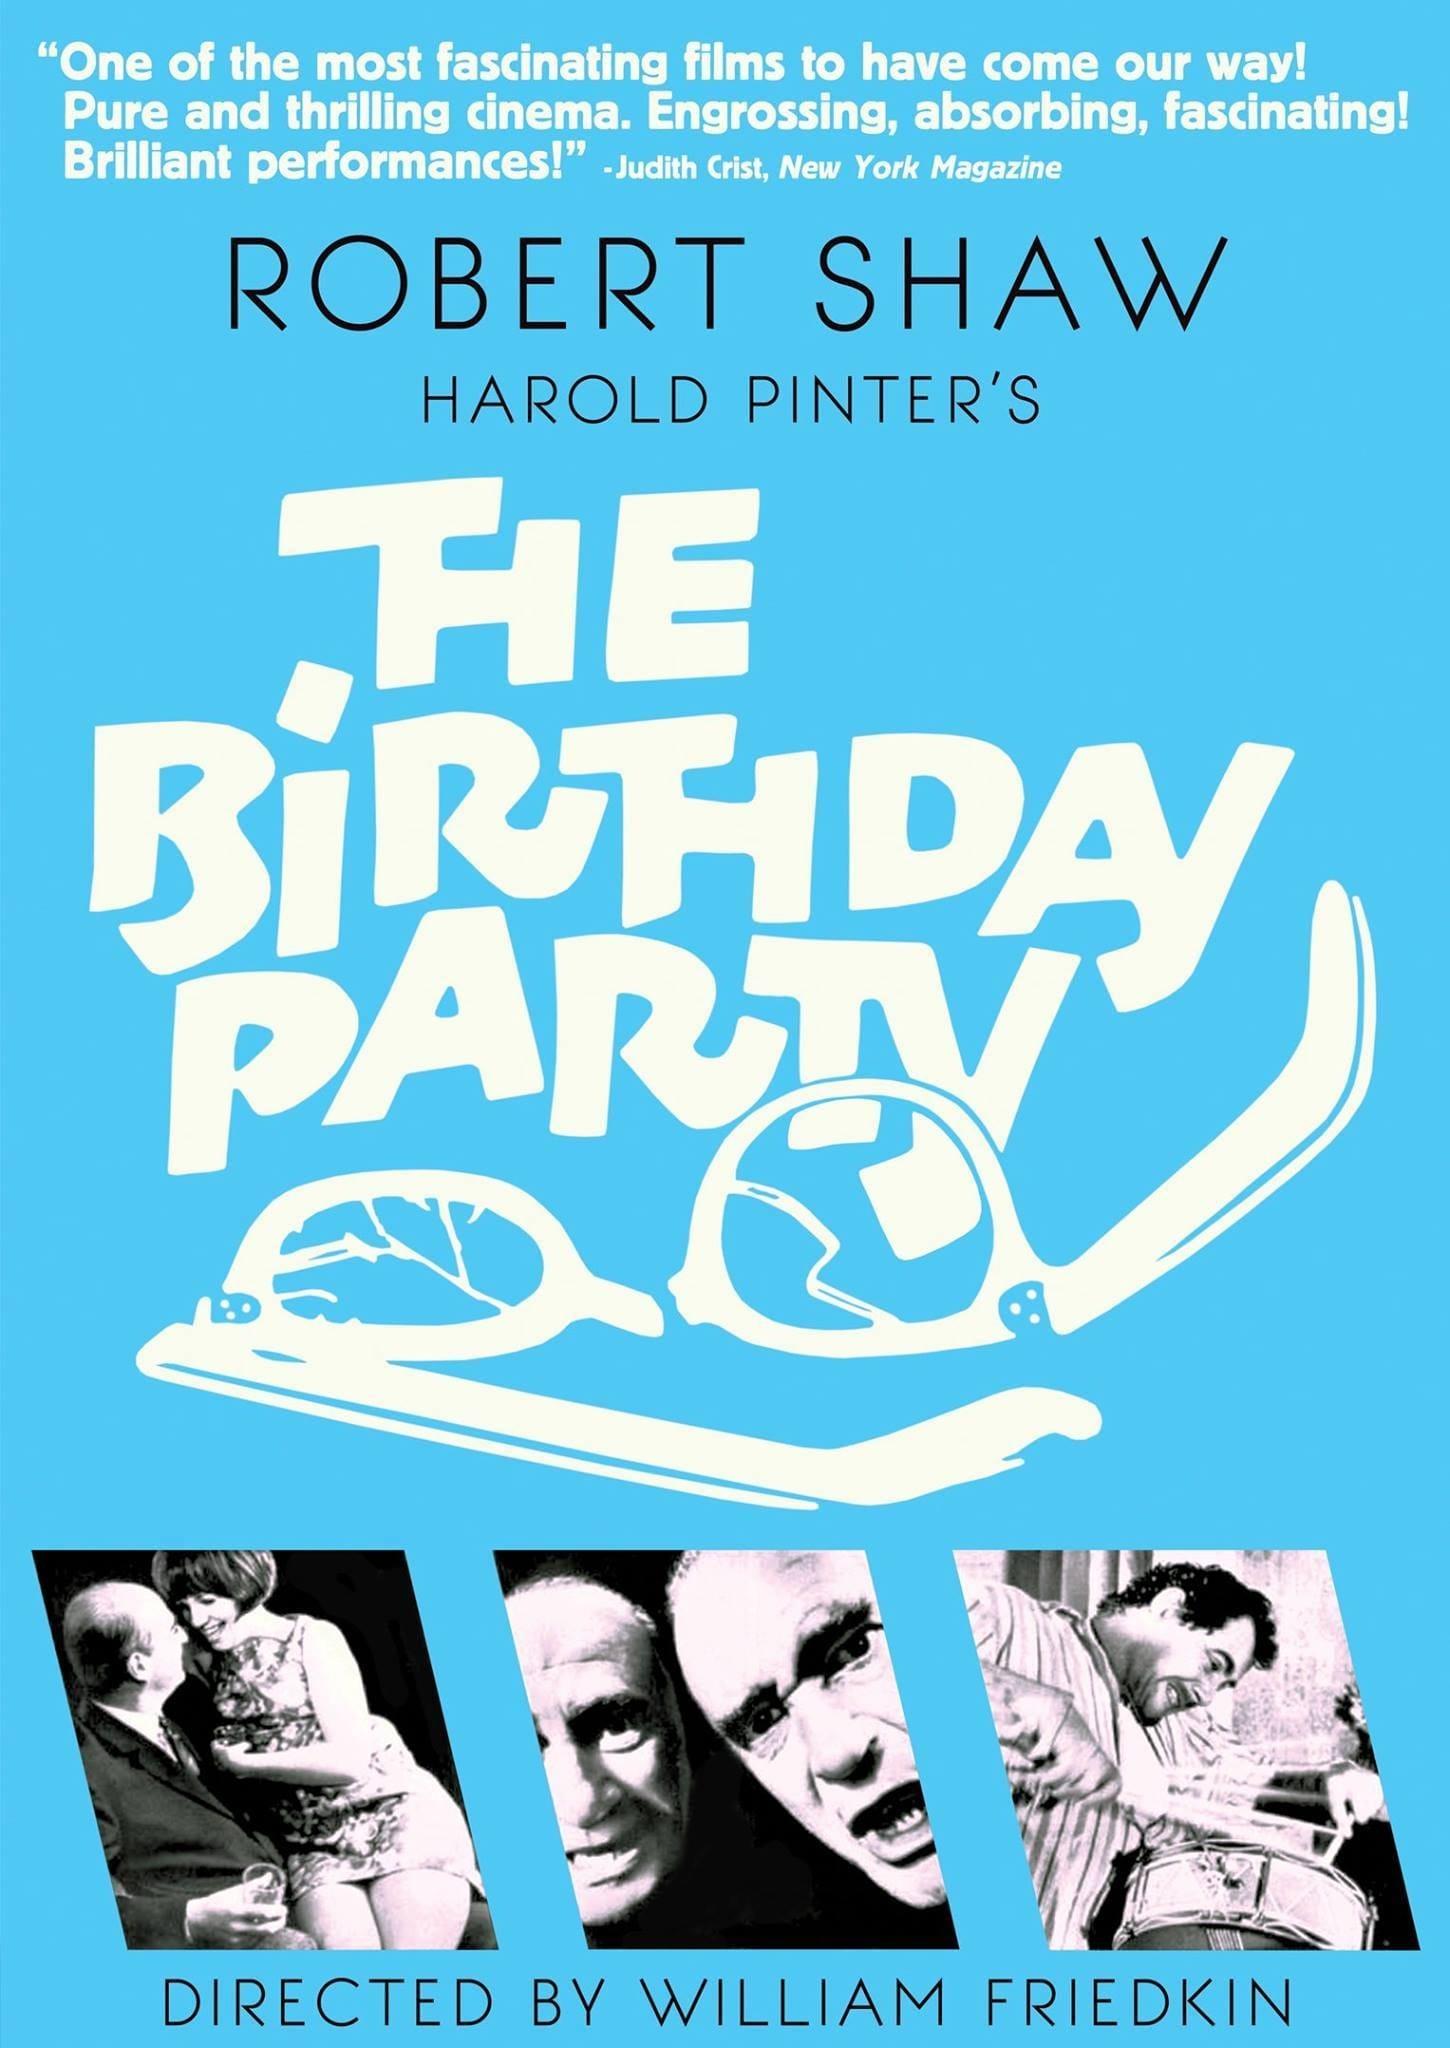 The Birthday Party poster